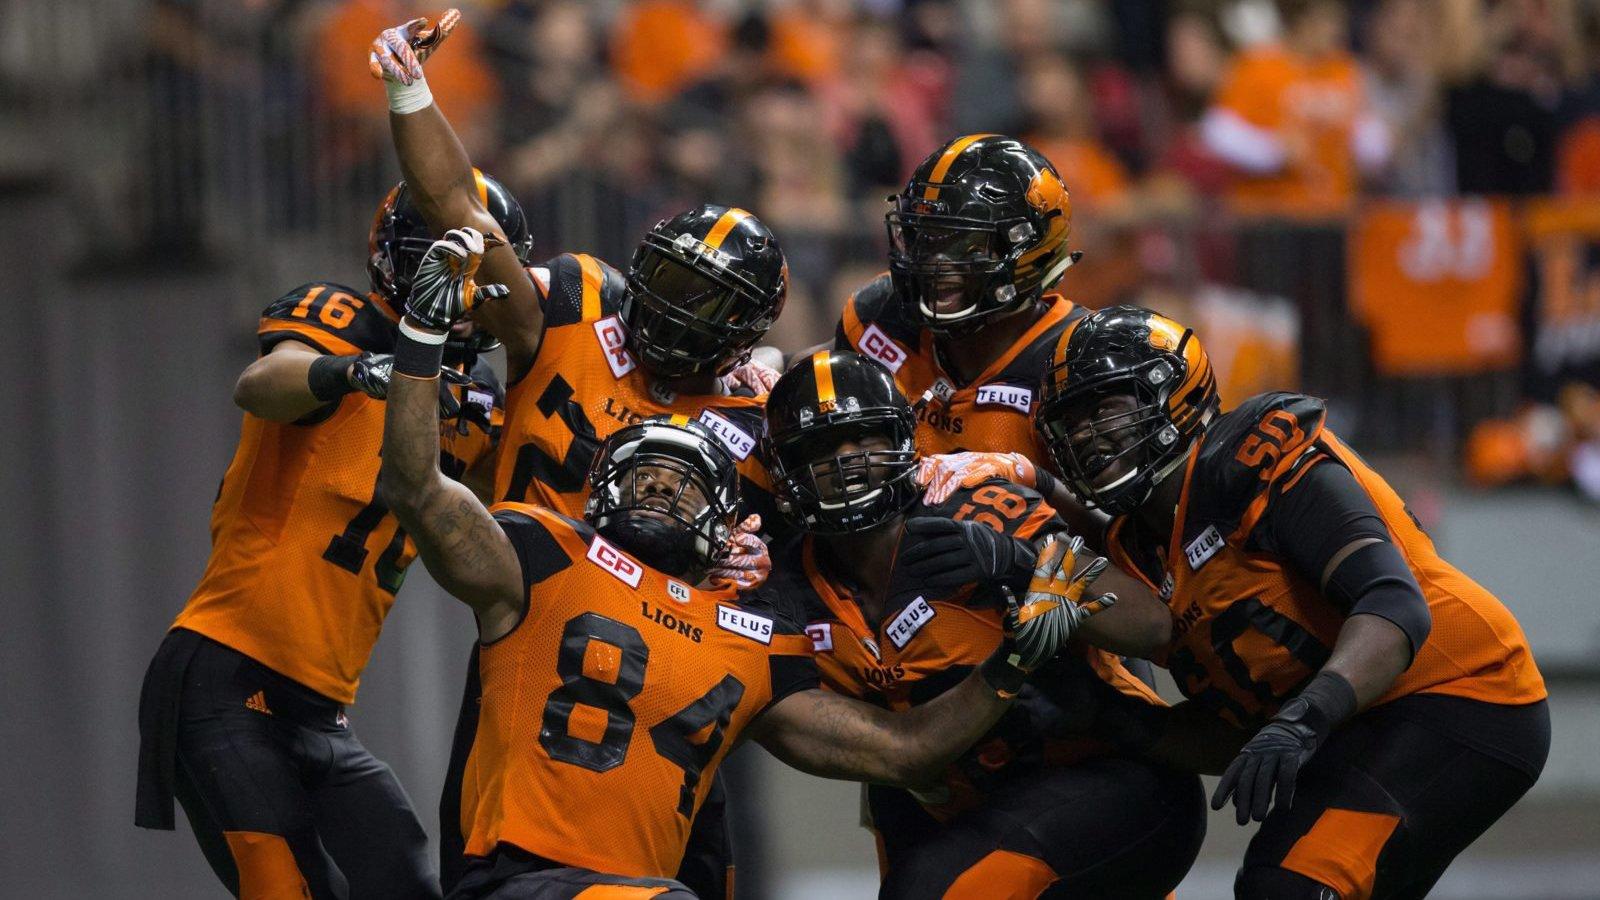 CFL Week 10 Betting: Lions vs. Stampeders Projected to Be Game of the Week cover